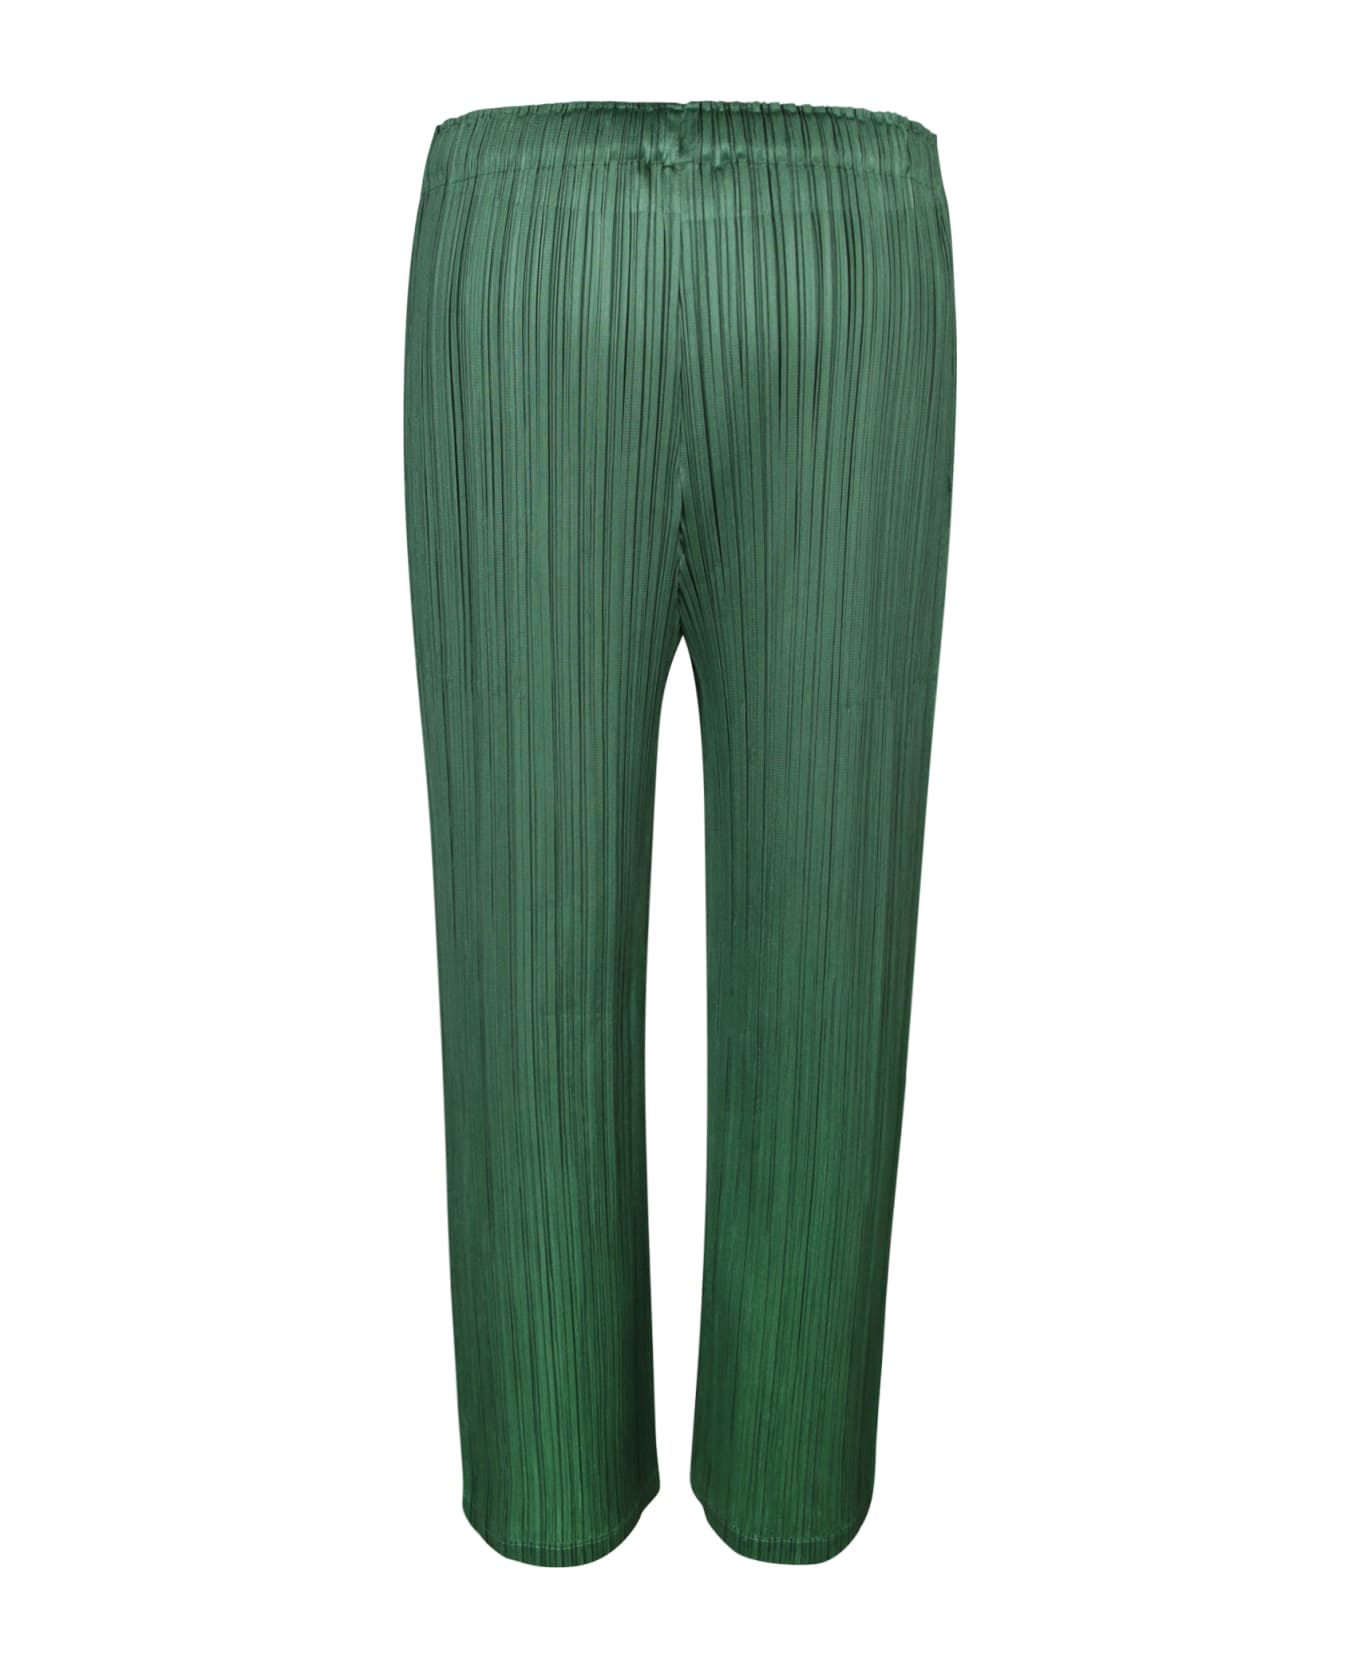 Issey Miyake Pleats Please Green Straight Trousers - Green